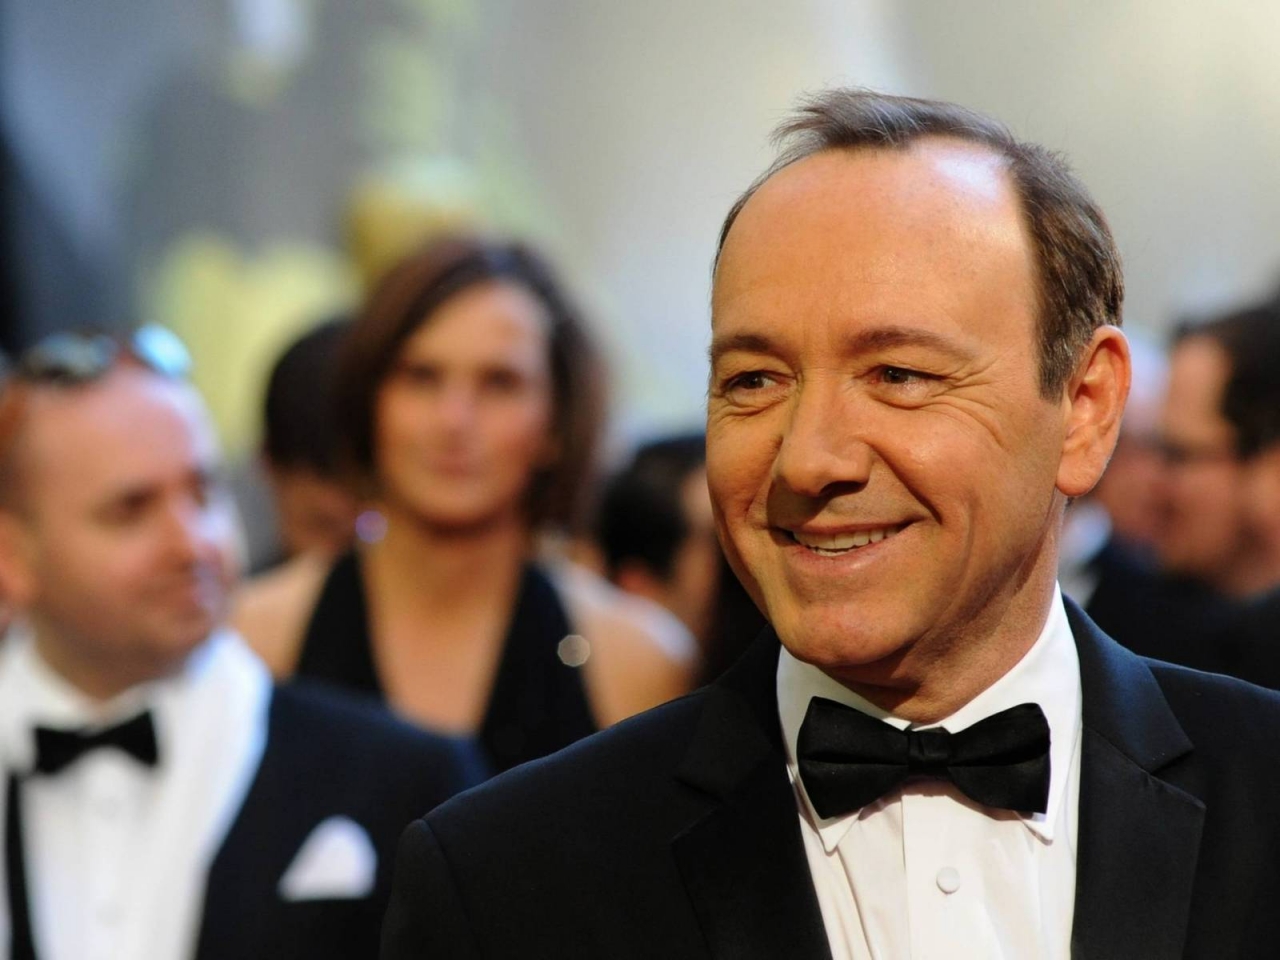 Kevin Spacey Smile for 1280 x 960 resolution